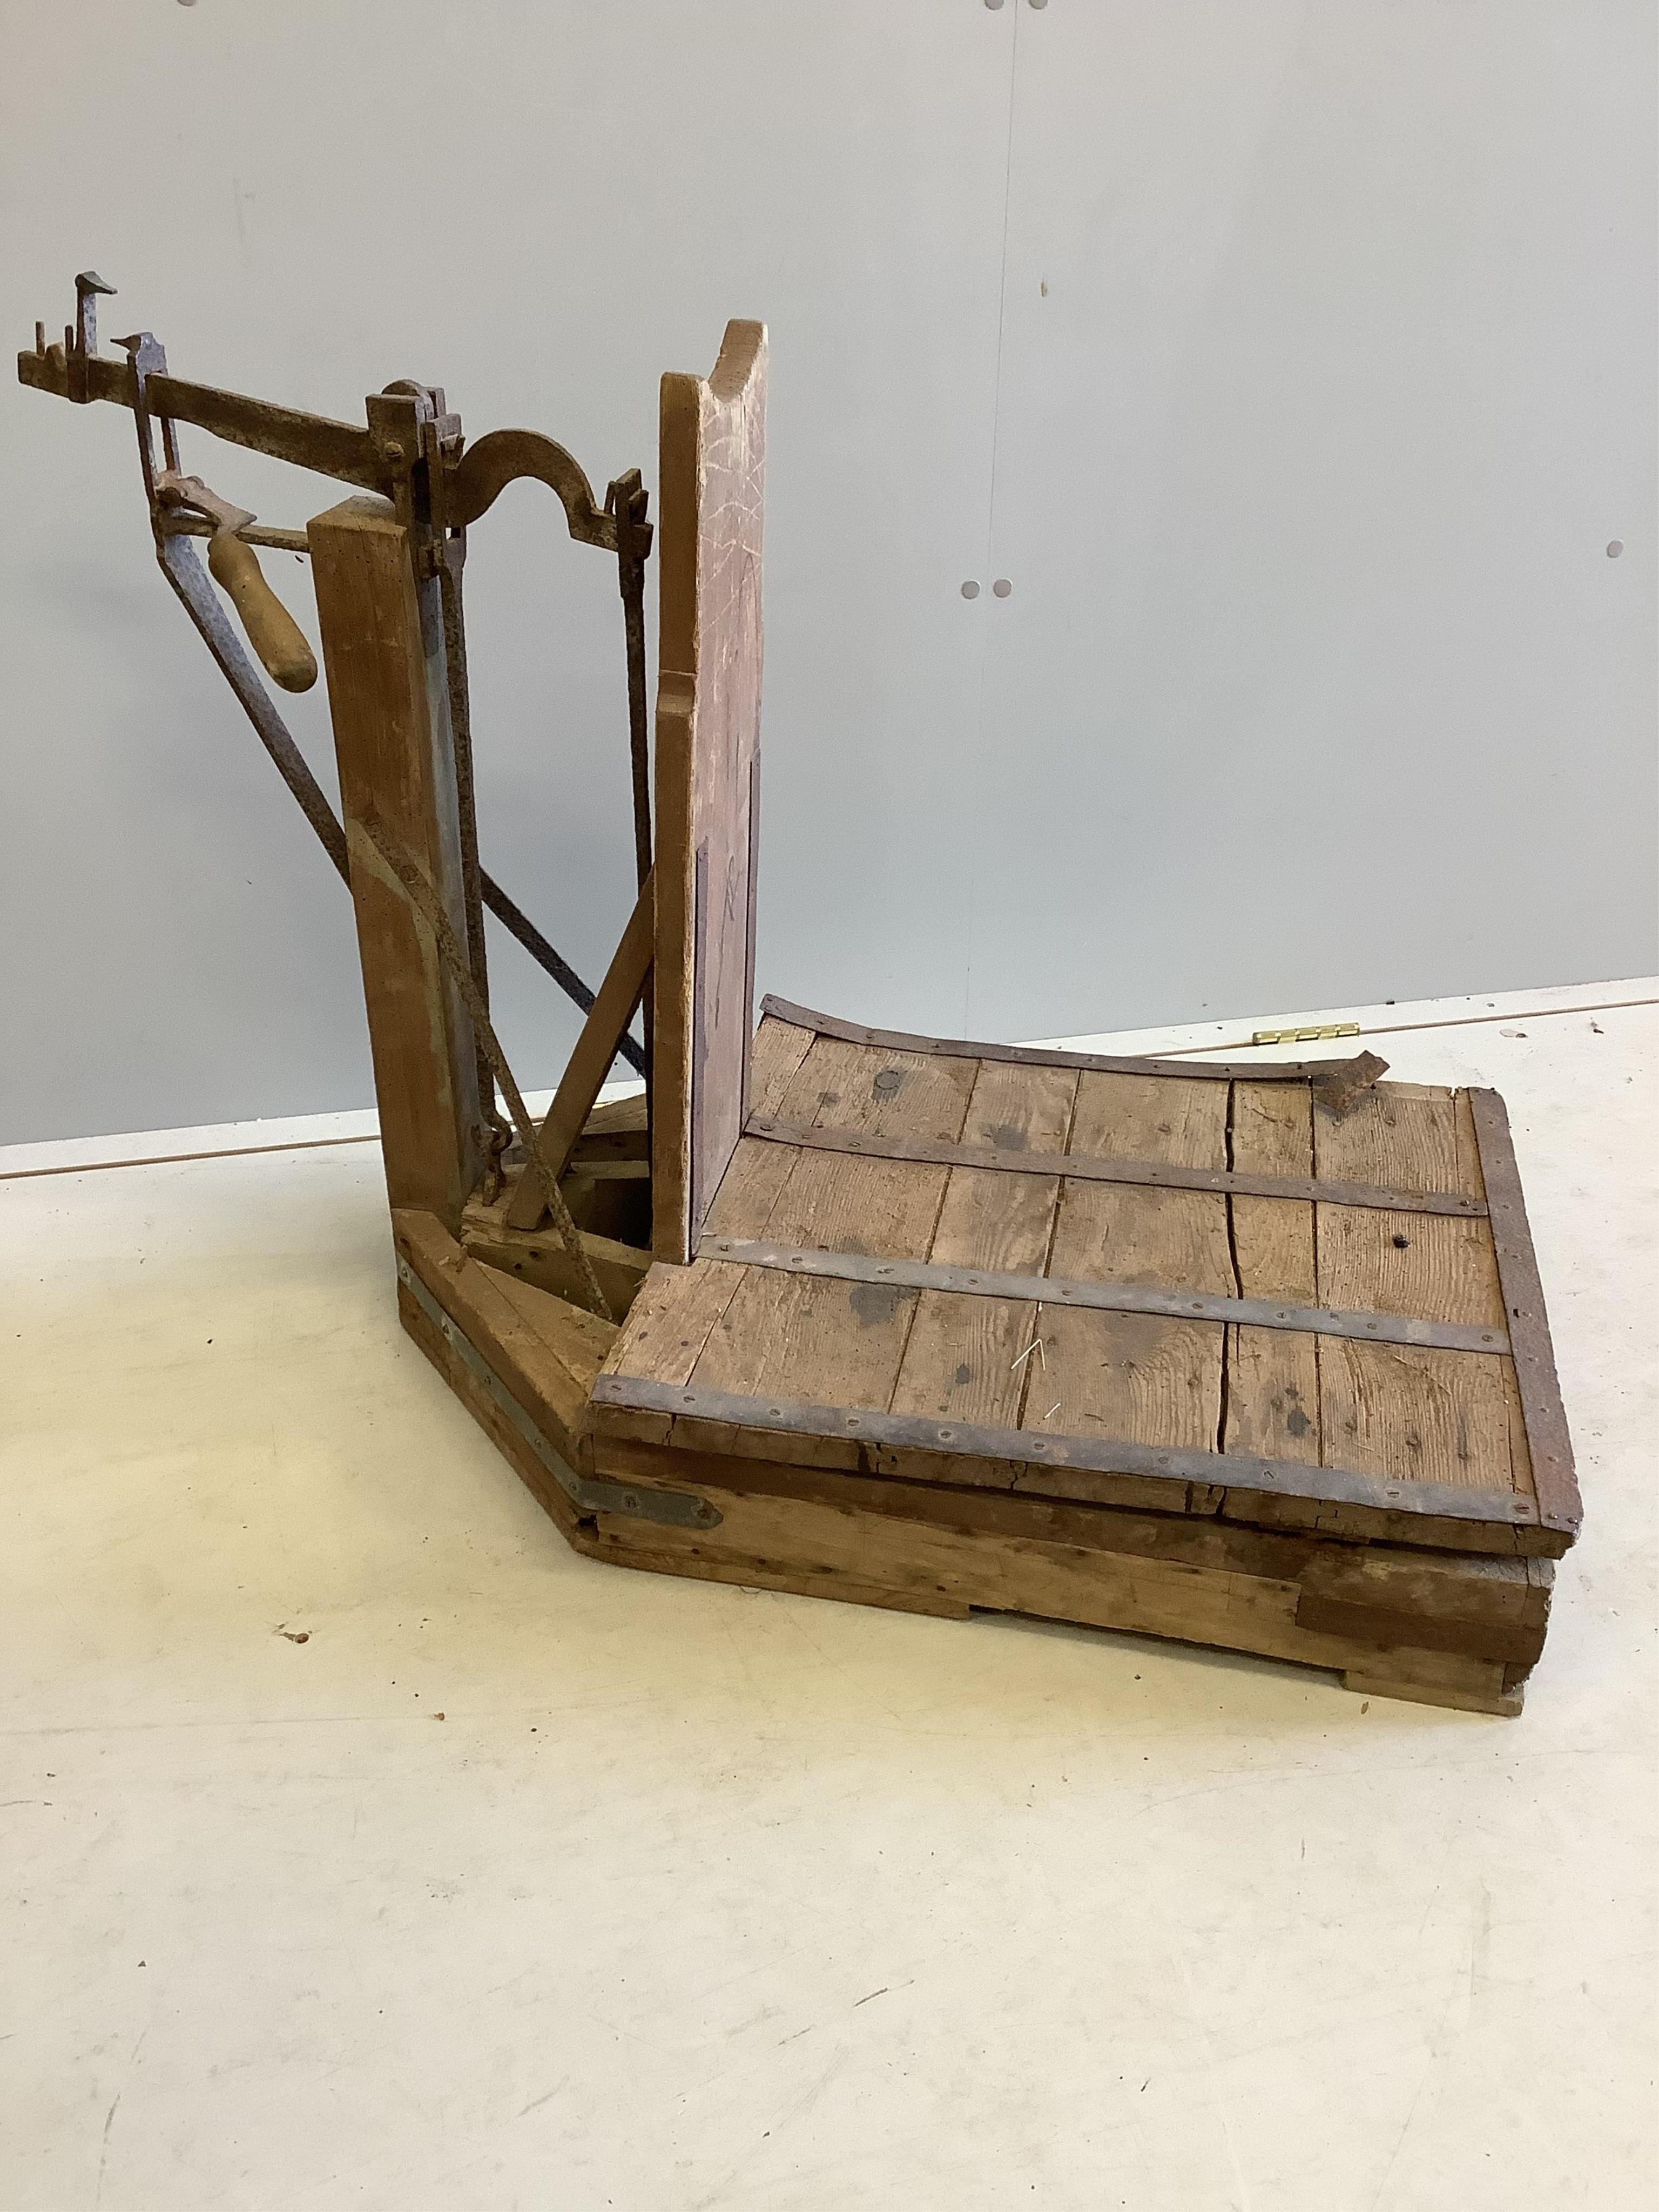 A set of iron bound wood sack scales, height 70cm. Condition - poor